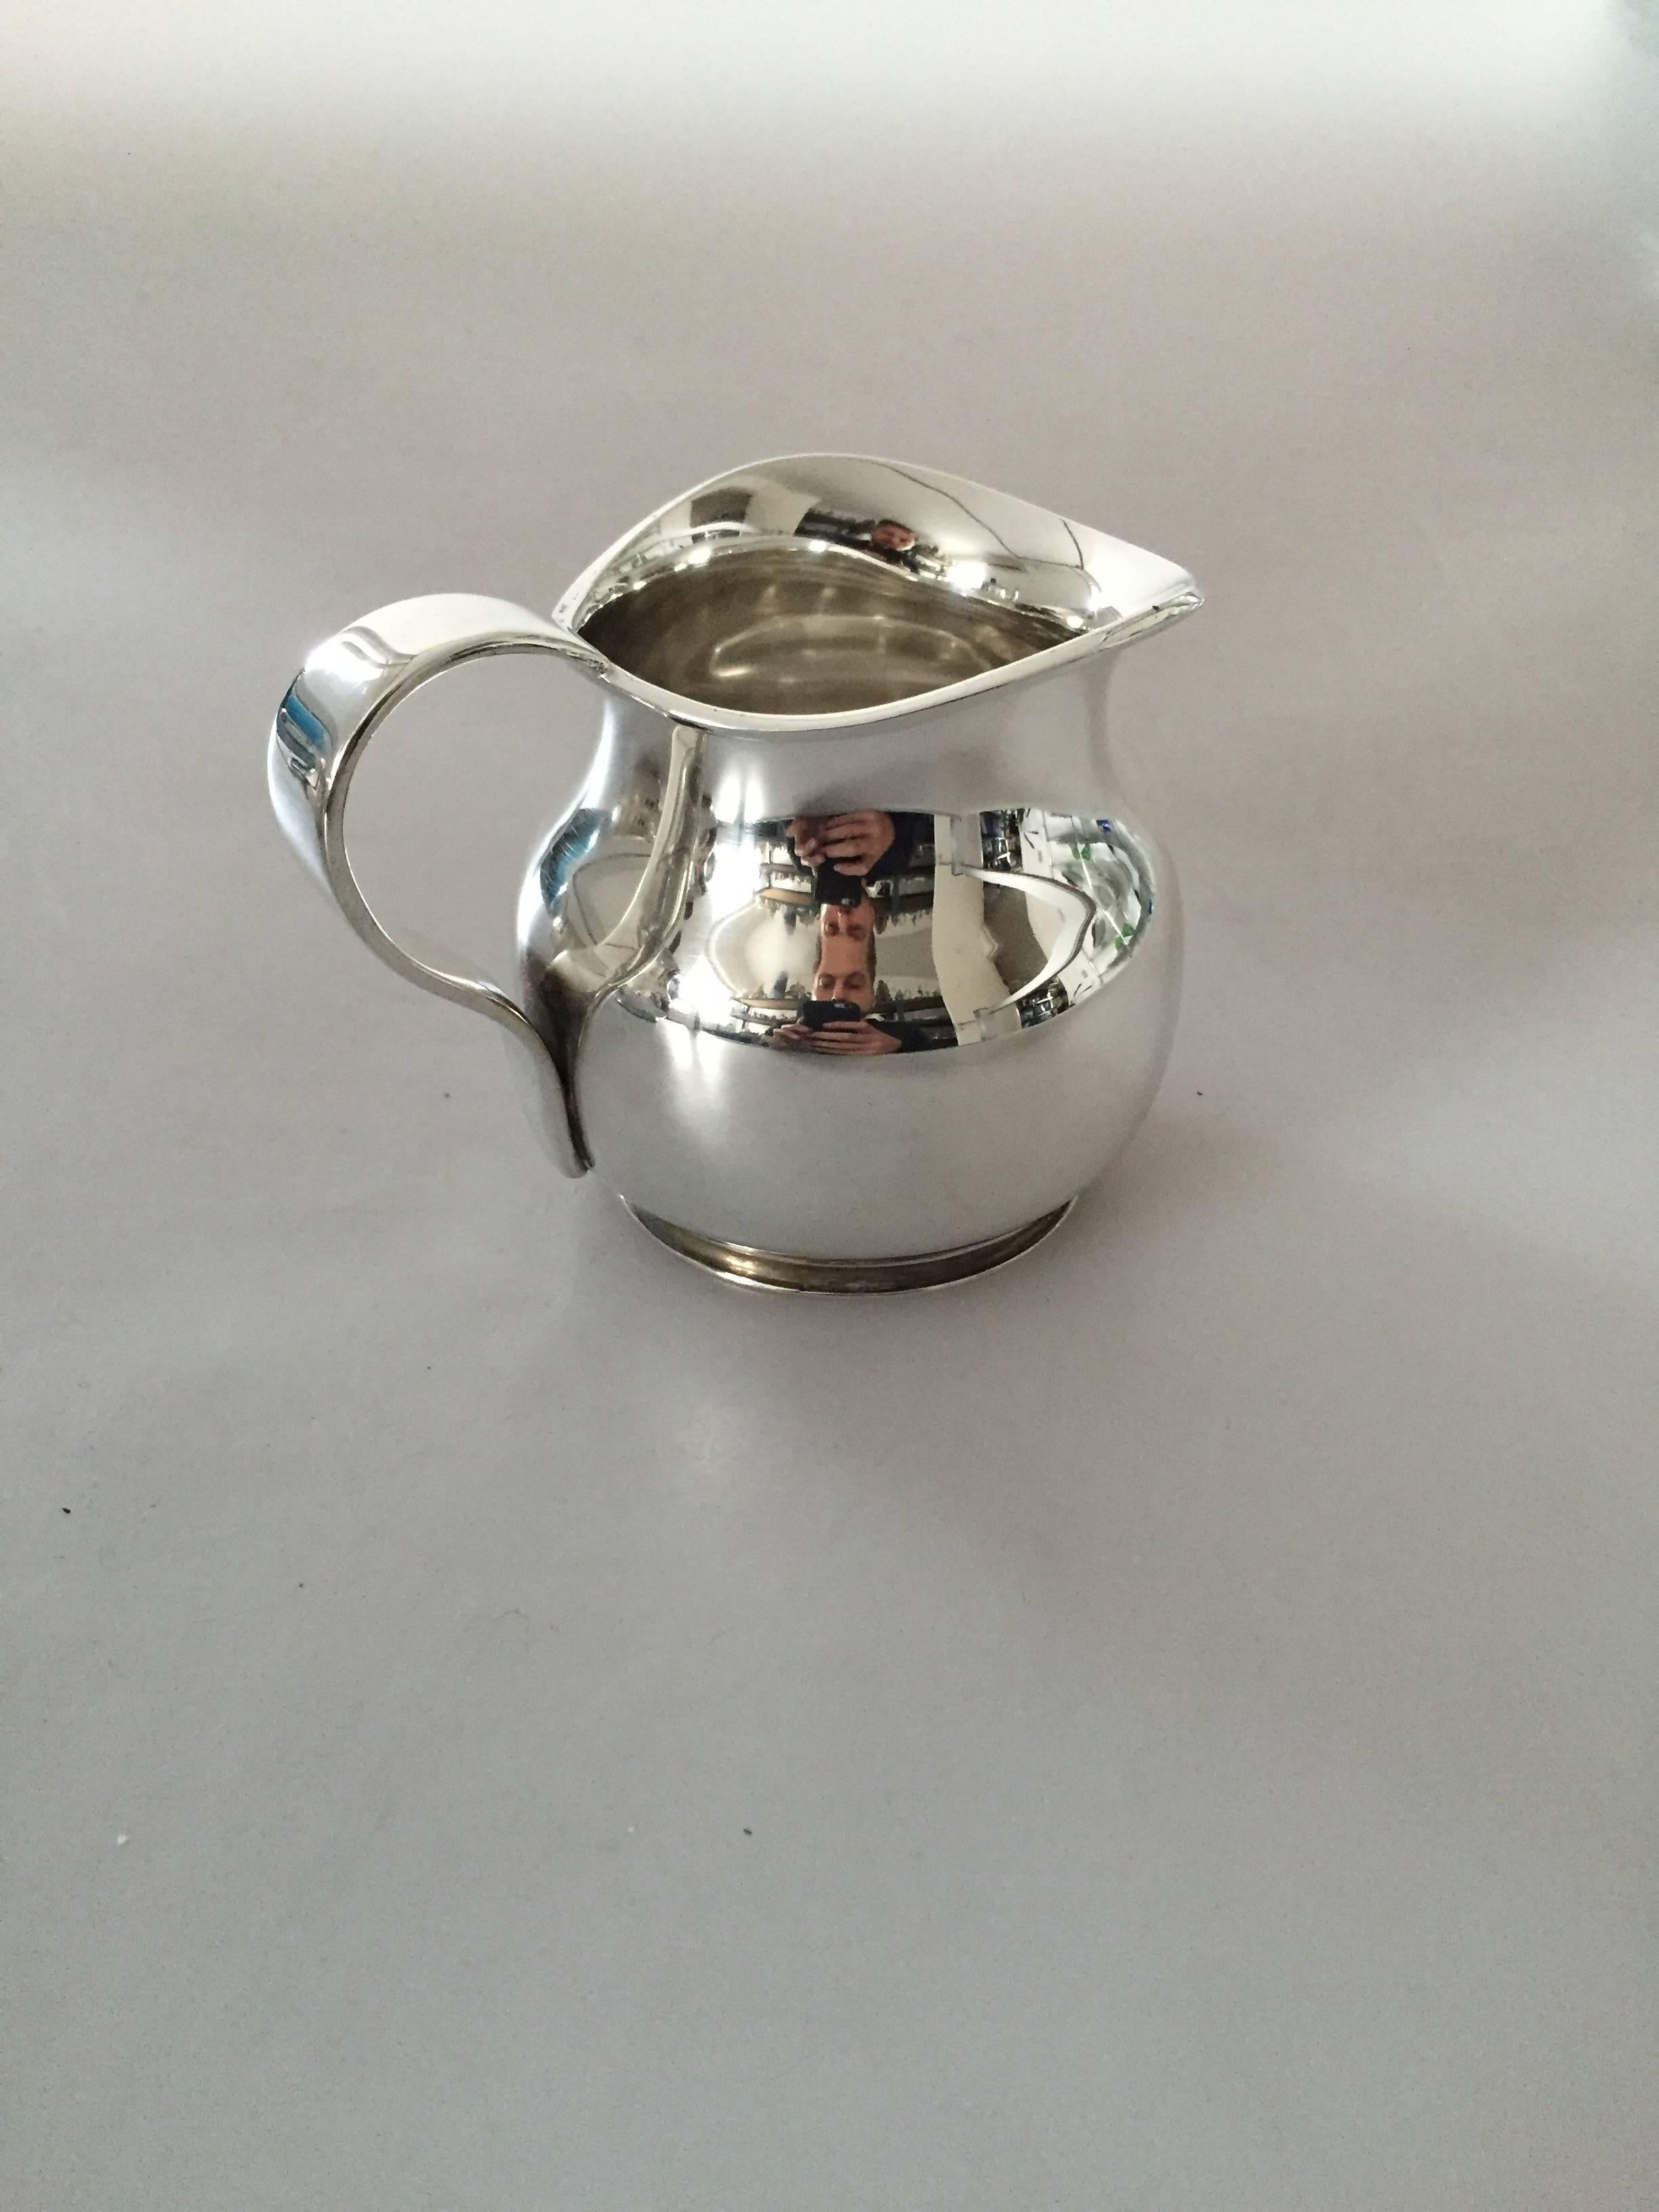 Hingelberg sterling silver coffee set; Coffee Pot, creamer, and sugar bowl. The set is from 1936 and was designed by Svend Weihrauch. All pieces are in good condition.

Coffee pot measures 21.5 cm tall, lid opening measures 9.5 cm in